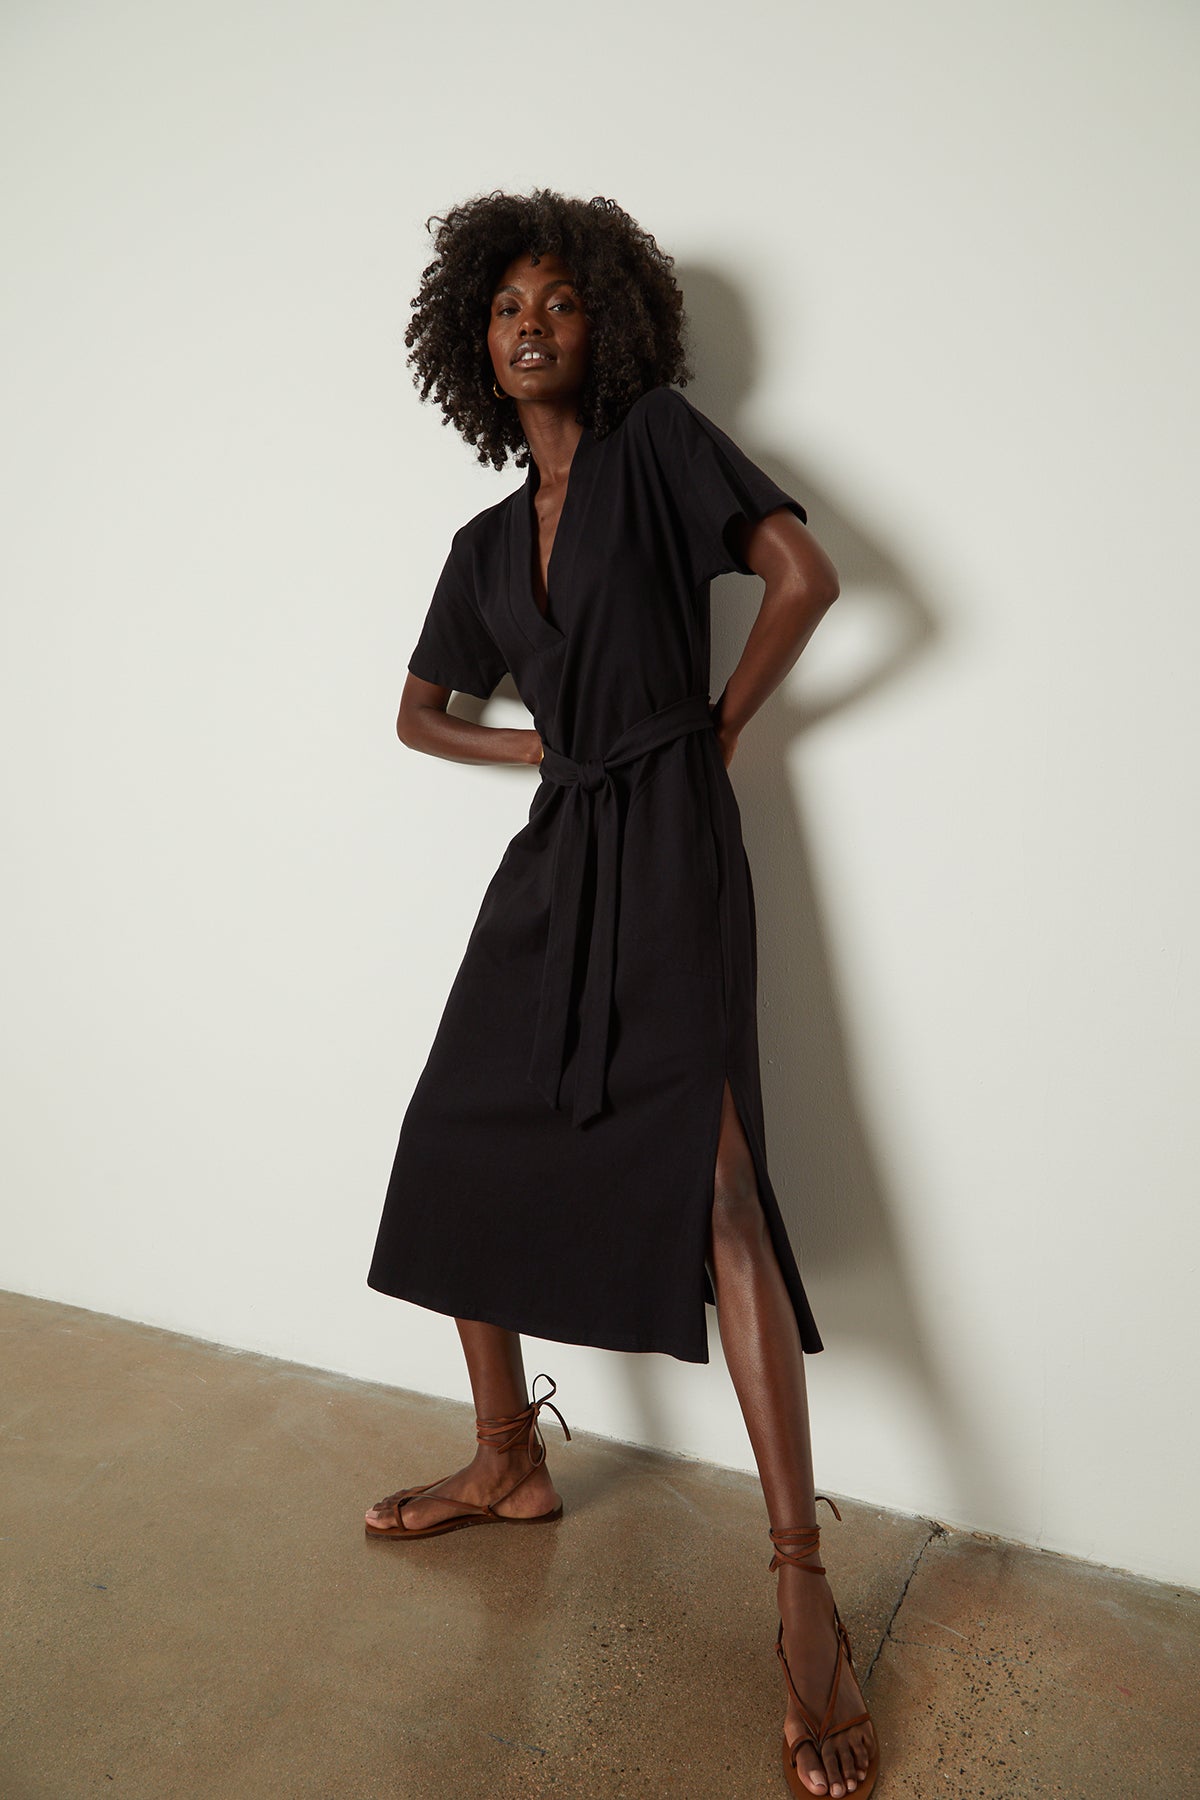   The model is wearing a black NORA STRUCTURED DRESS by Velvet by Graham & Spencer with a belt. 